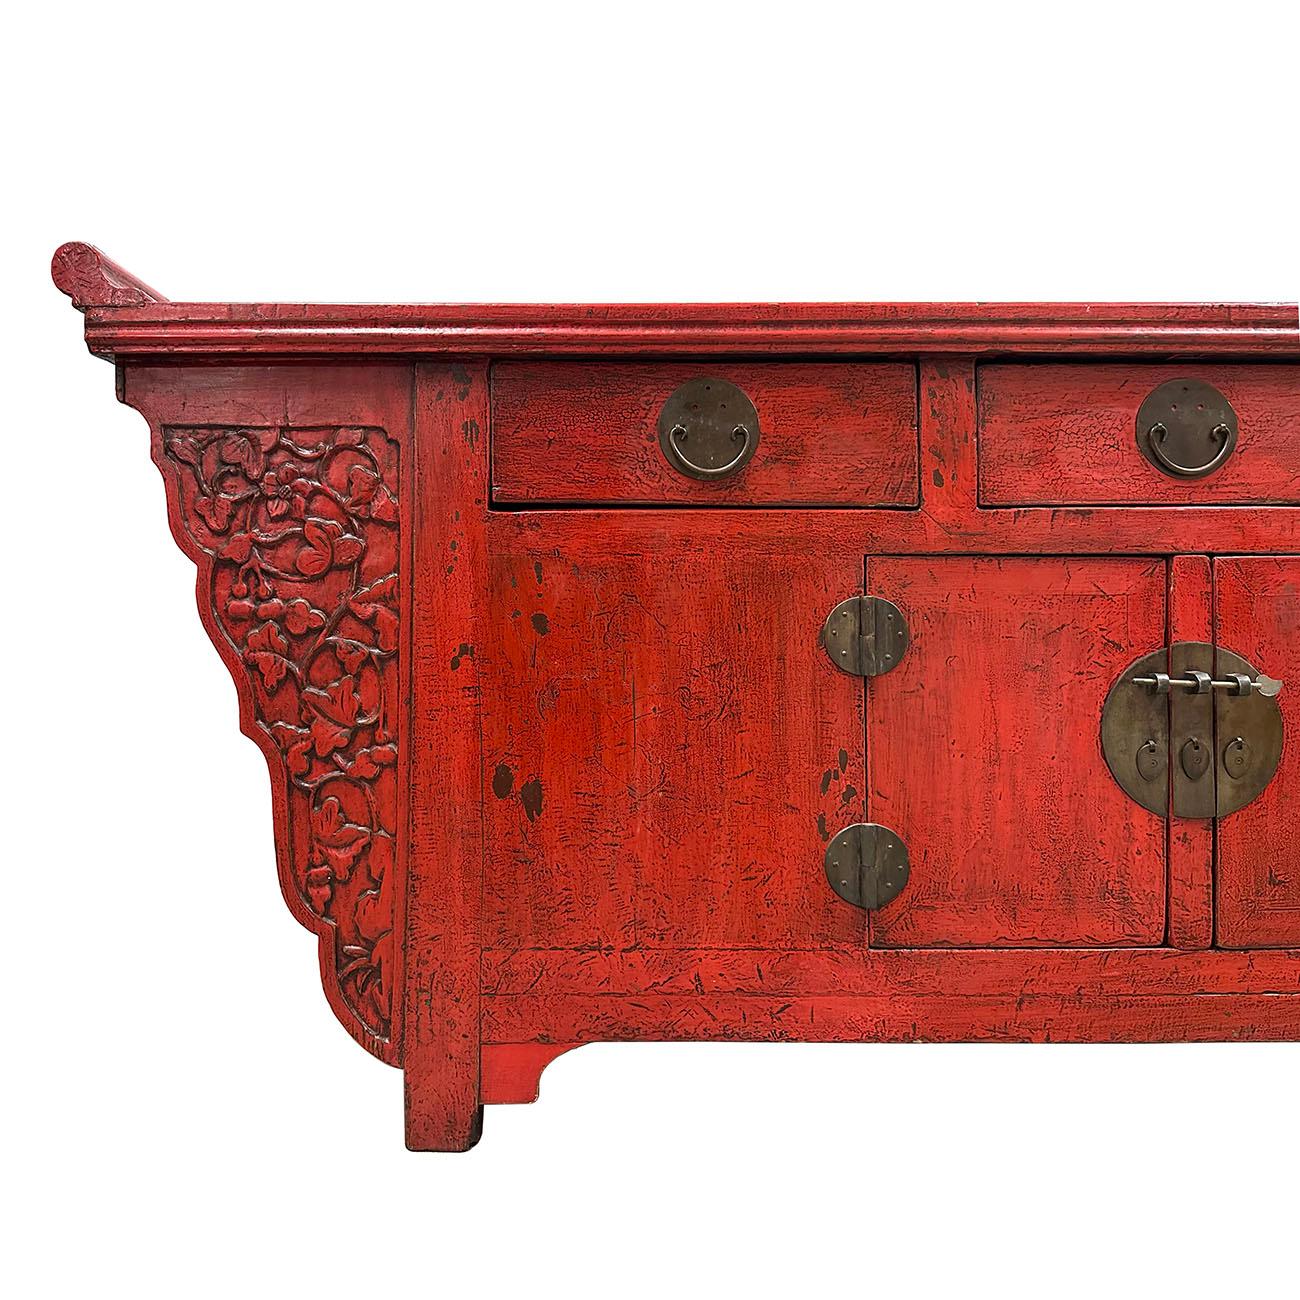 Chinese Export Early 20th Century Chinese Red Lacquered Altar Cabinet, Buffet Table, Sideboard For Sale